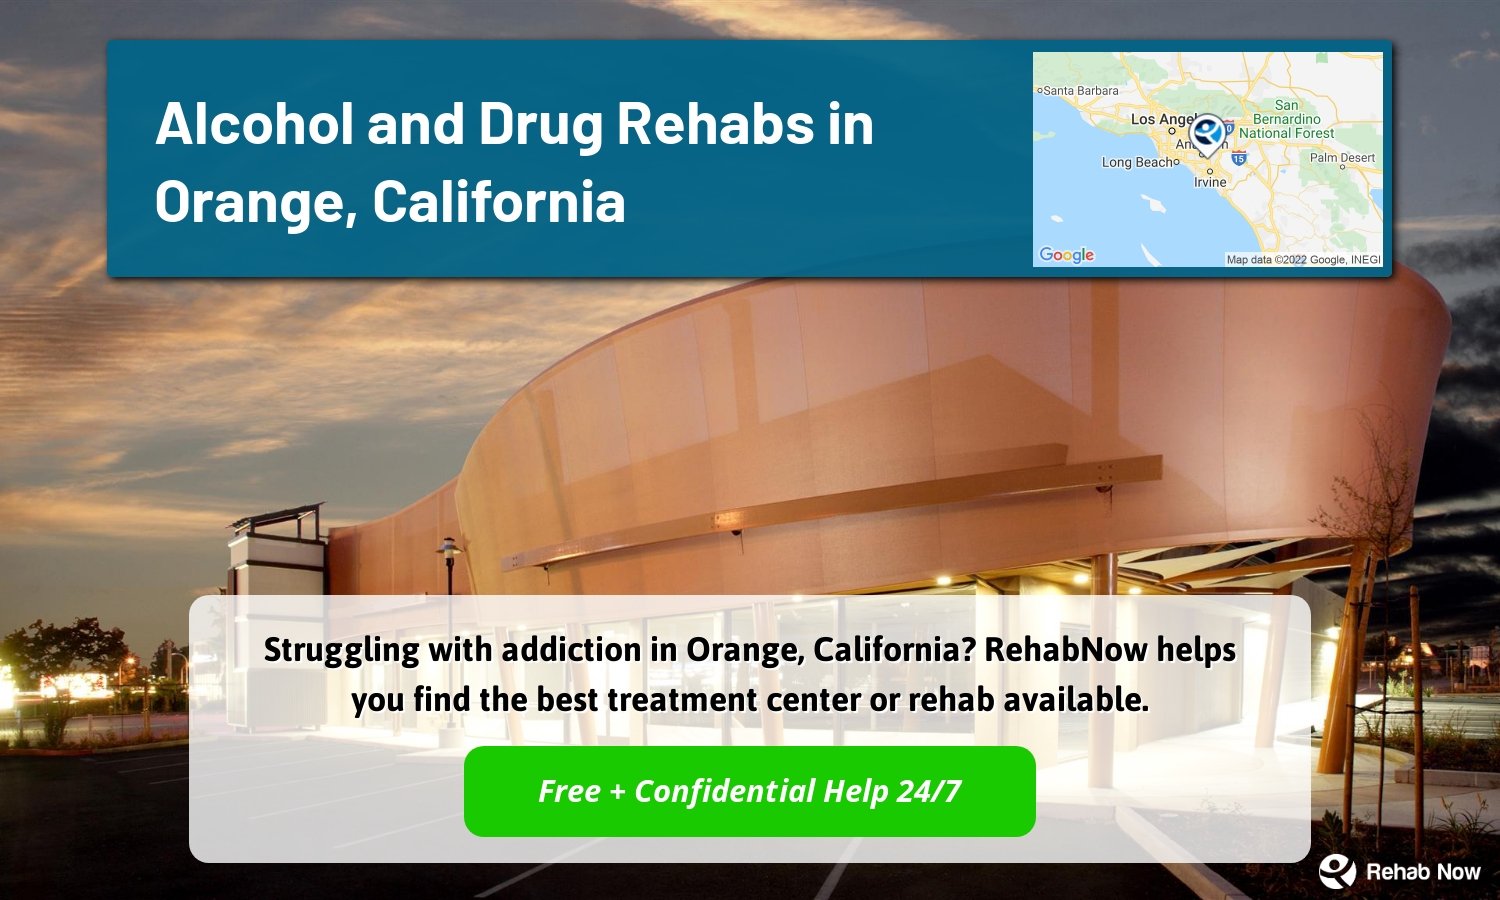 Struggling with addiction in Orange, California? RehabNow helps you find the best treatment center or rehab available.